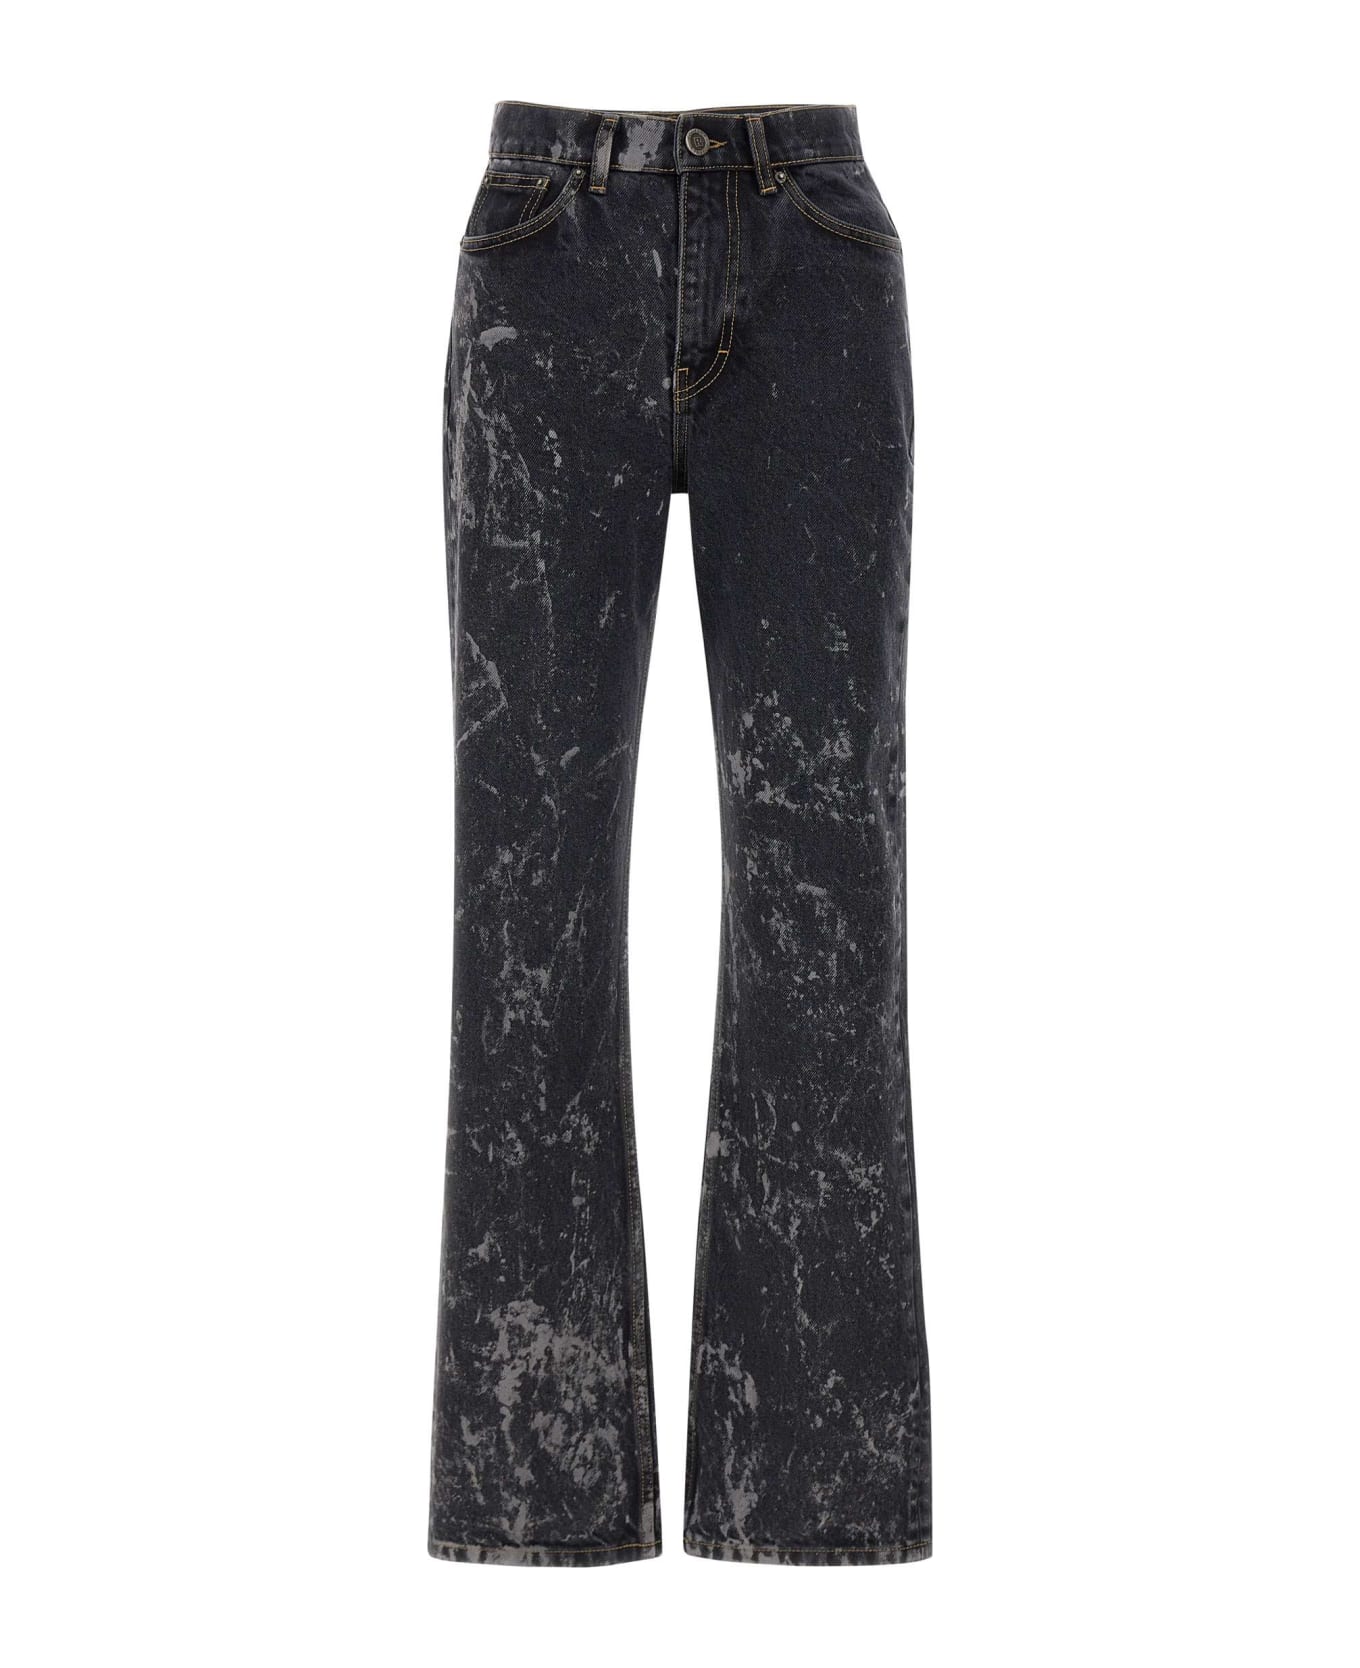 Rotate by Birger Christensen 'washed Twill' Jeans - Acid washed